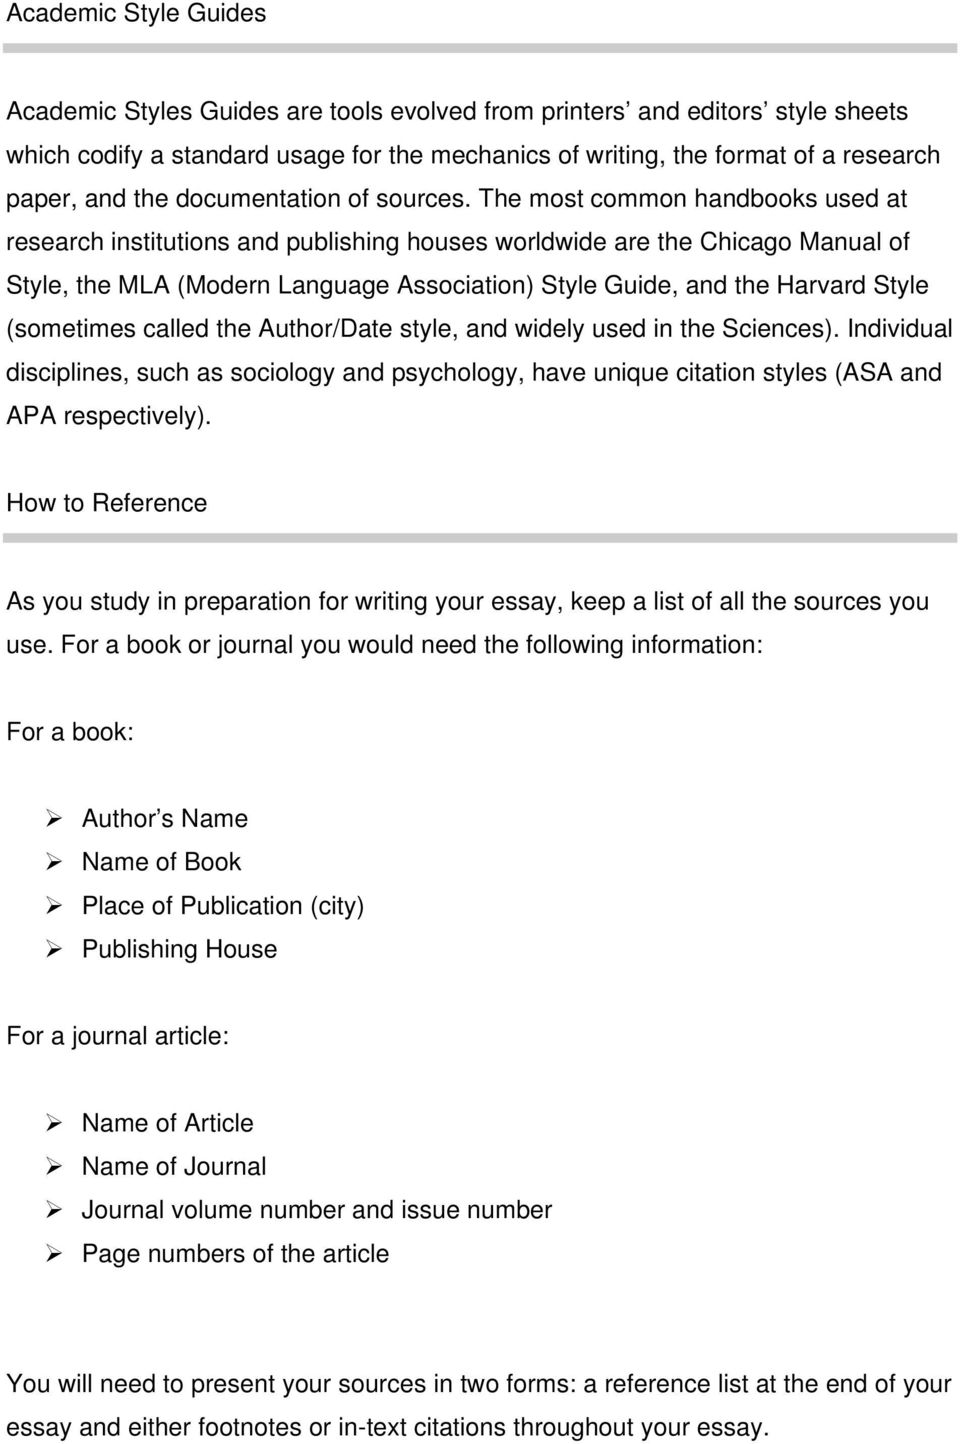 The most common handbooks used at research institutions and publishing houses worldwide are the Chicago Manual of Style, the MLA (Modern Language Association) Style Guide, and the Harvard Style